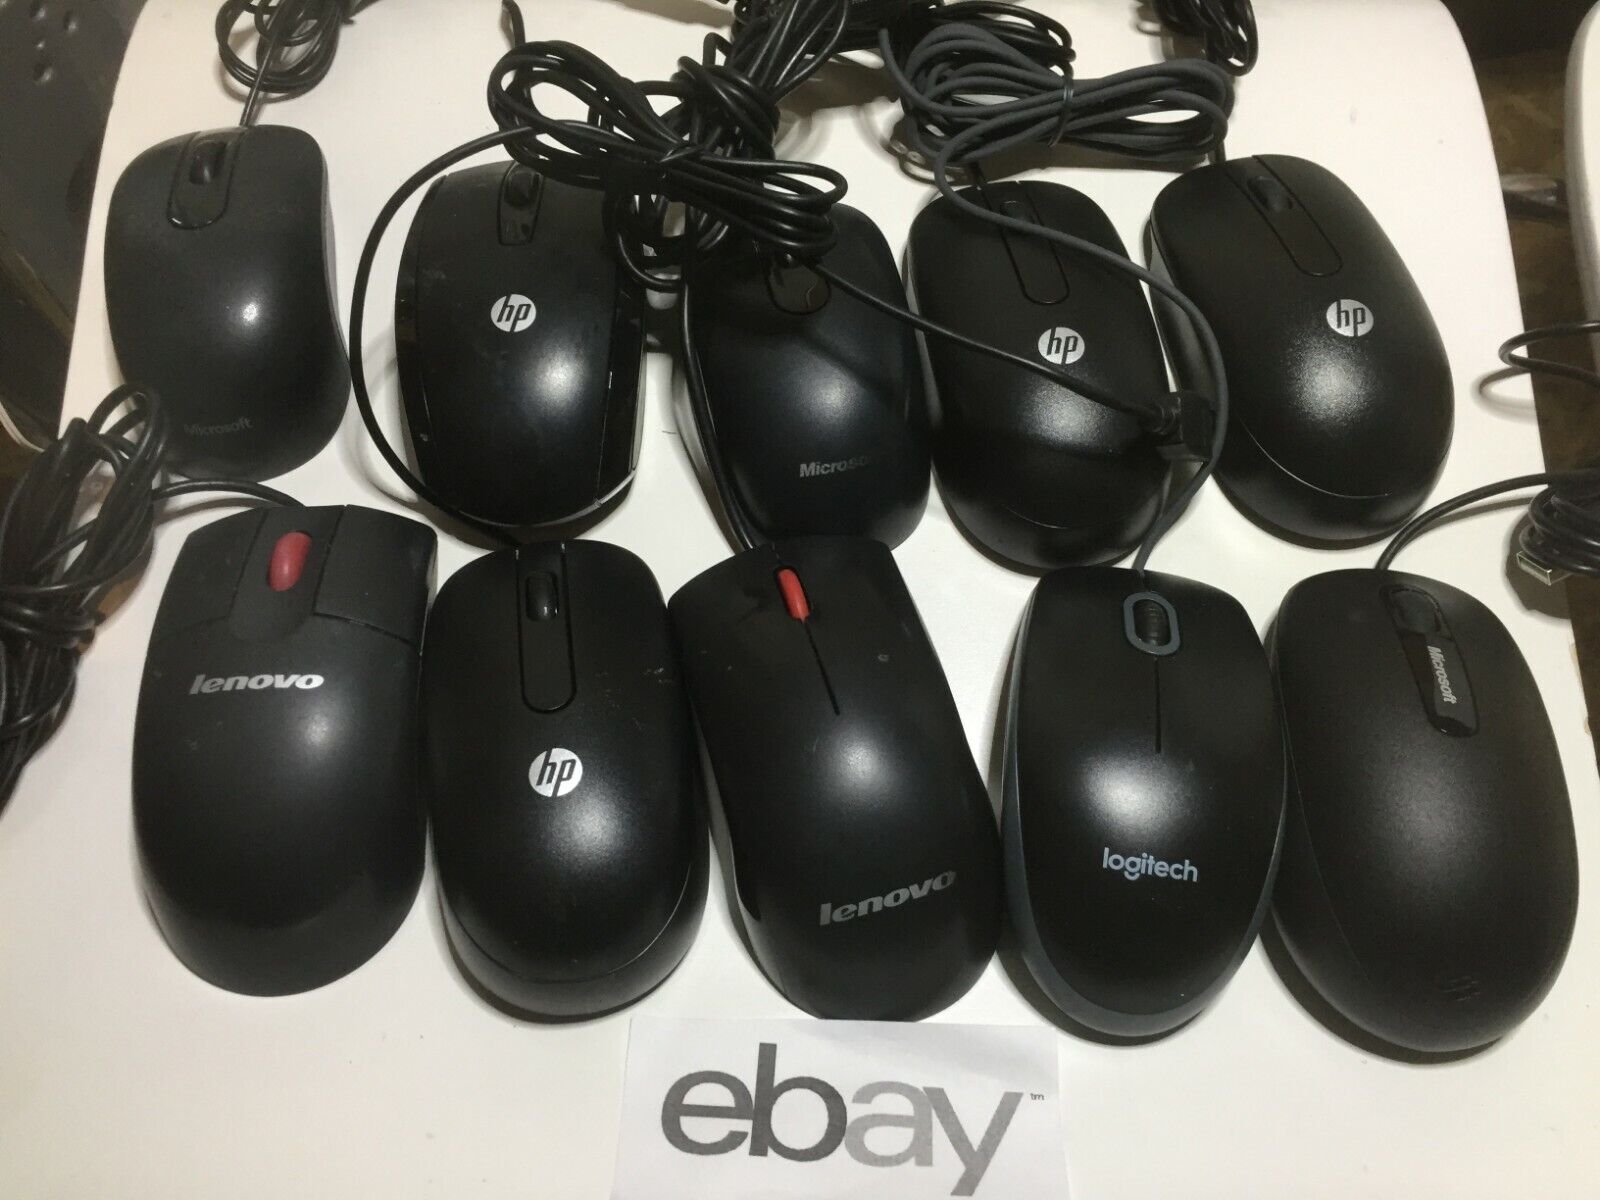 Mixed Lot of 10 Lenovo HP Microsoft Logitech USB Optical Mouse w/ Scroll Wheel  Dell Does Not Apply